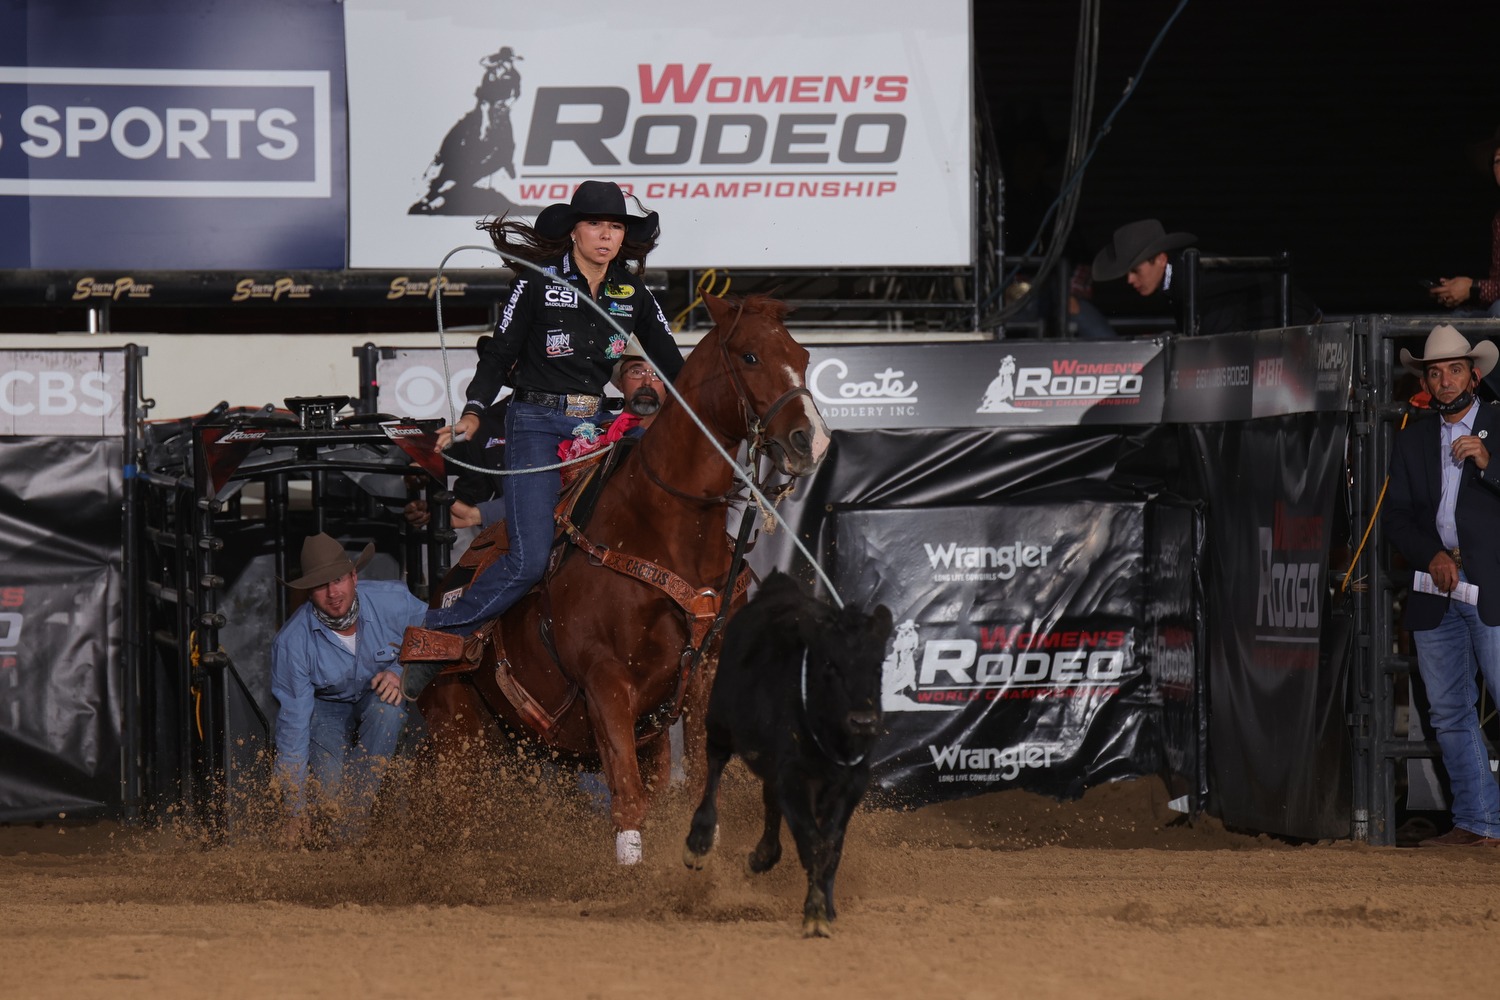 The Gamer: Outhier Wins Back-to-back Women’s Rodeo World Championship Breakaway Roping World Titles